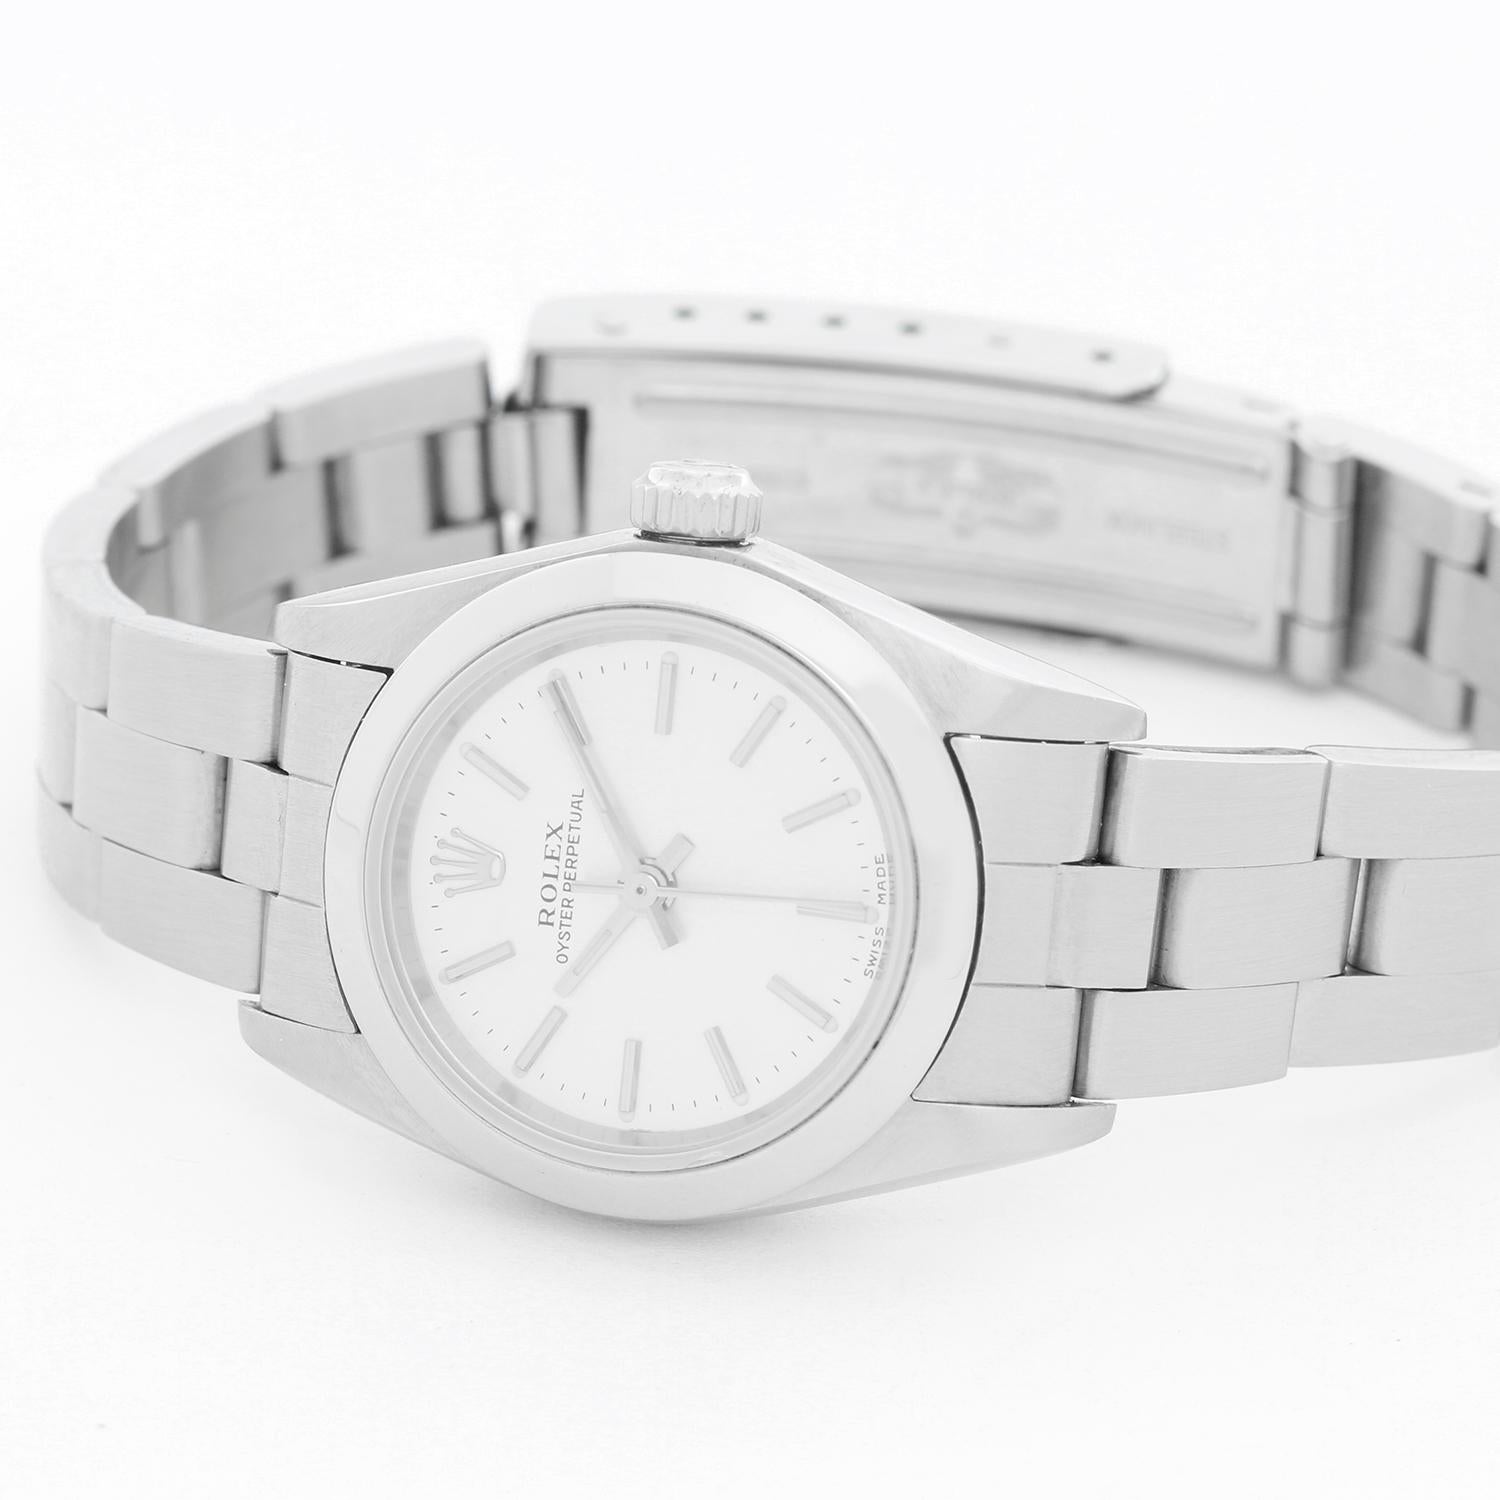 Rolex Ladies Oyster Perpetual No-Date Stainless Steel Watch 67180 -  Automatic winding. Stainless steel case with smooth bezel (25mm diameter). Silver dial with stick markers. Stainless steel Oyster bracelet. Pre-owned with box.